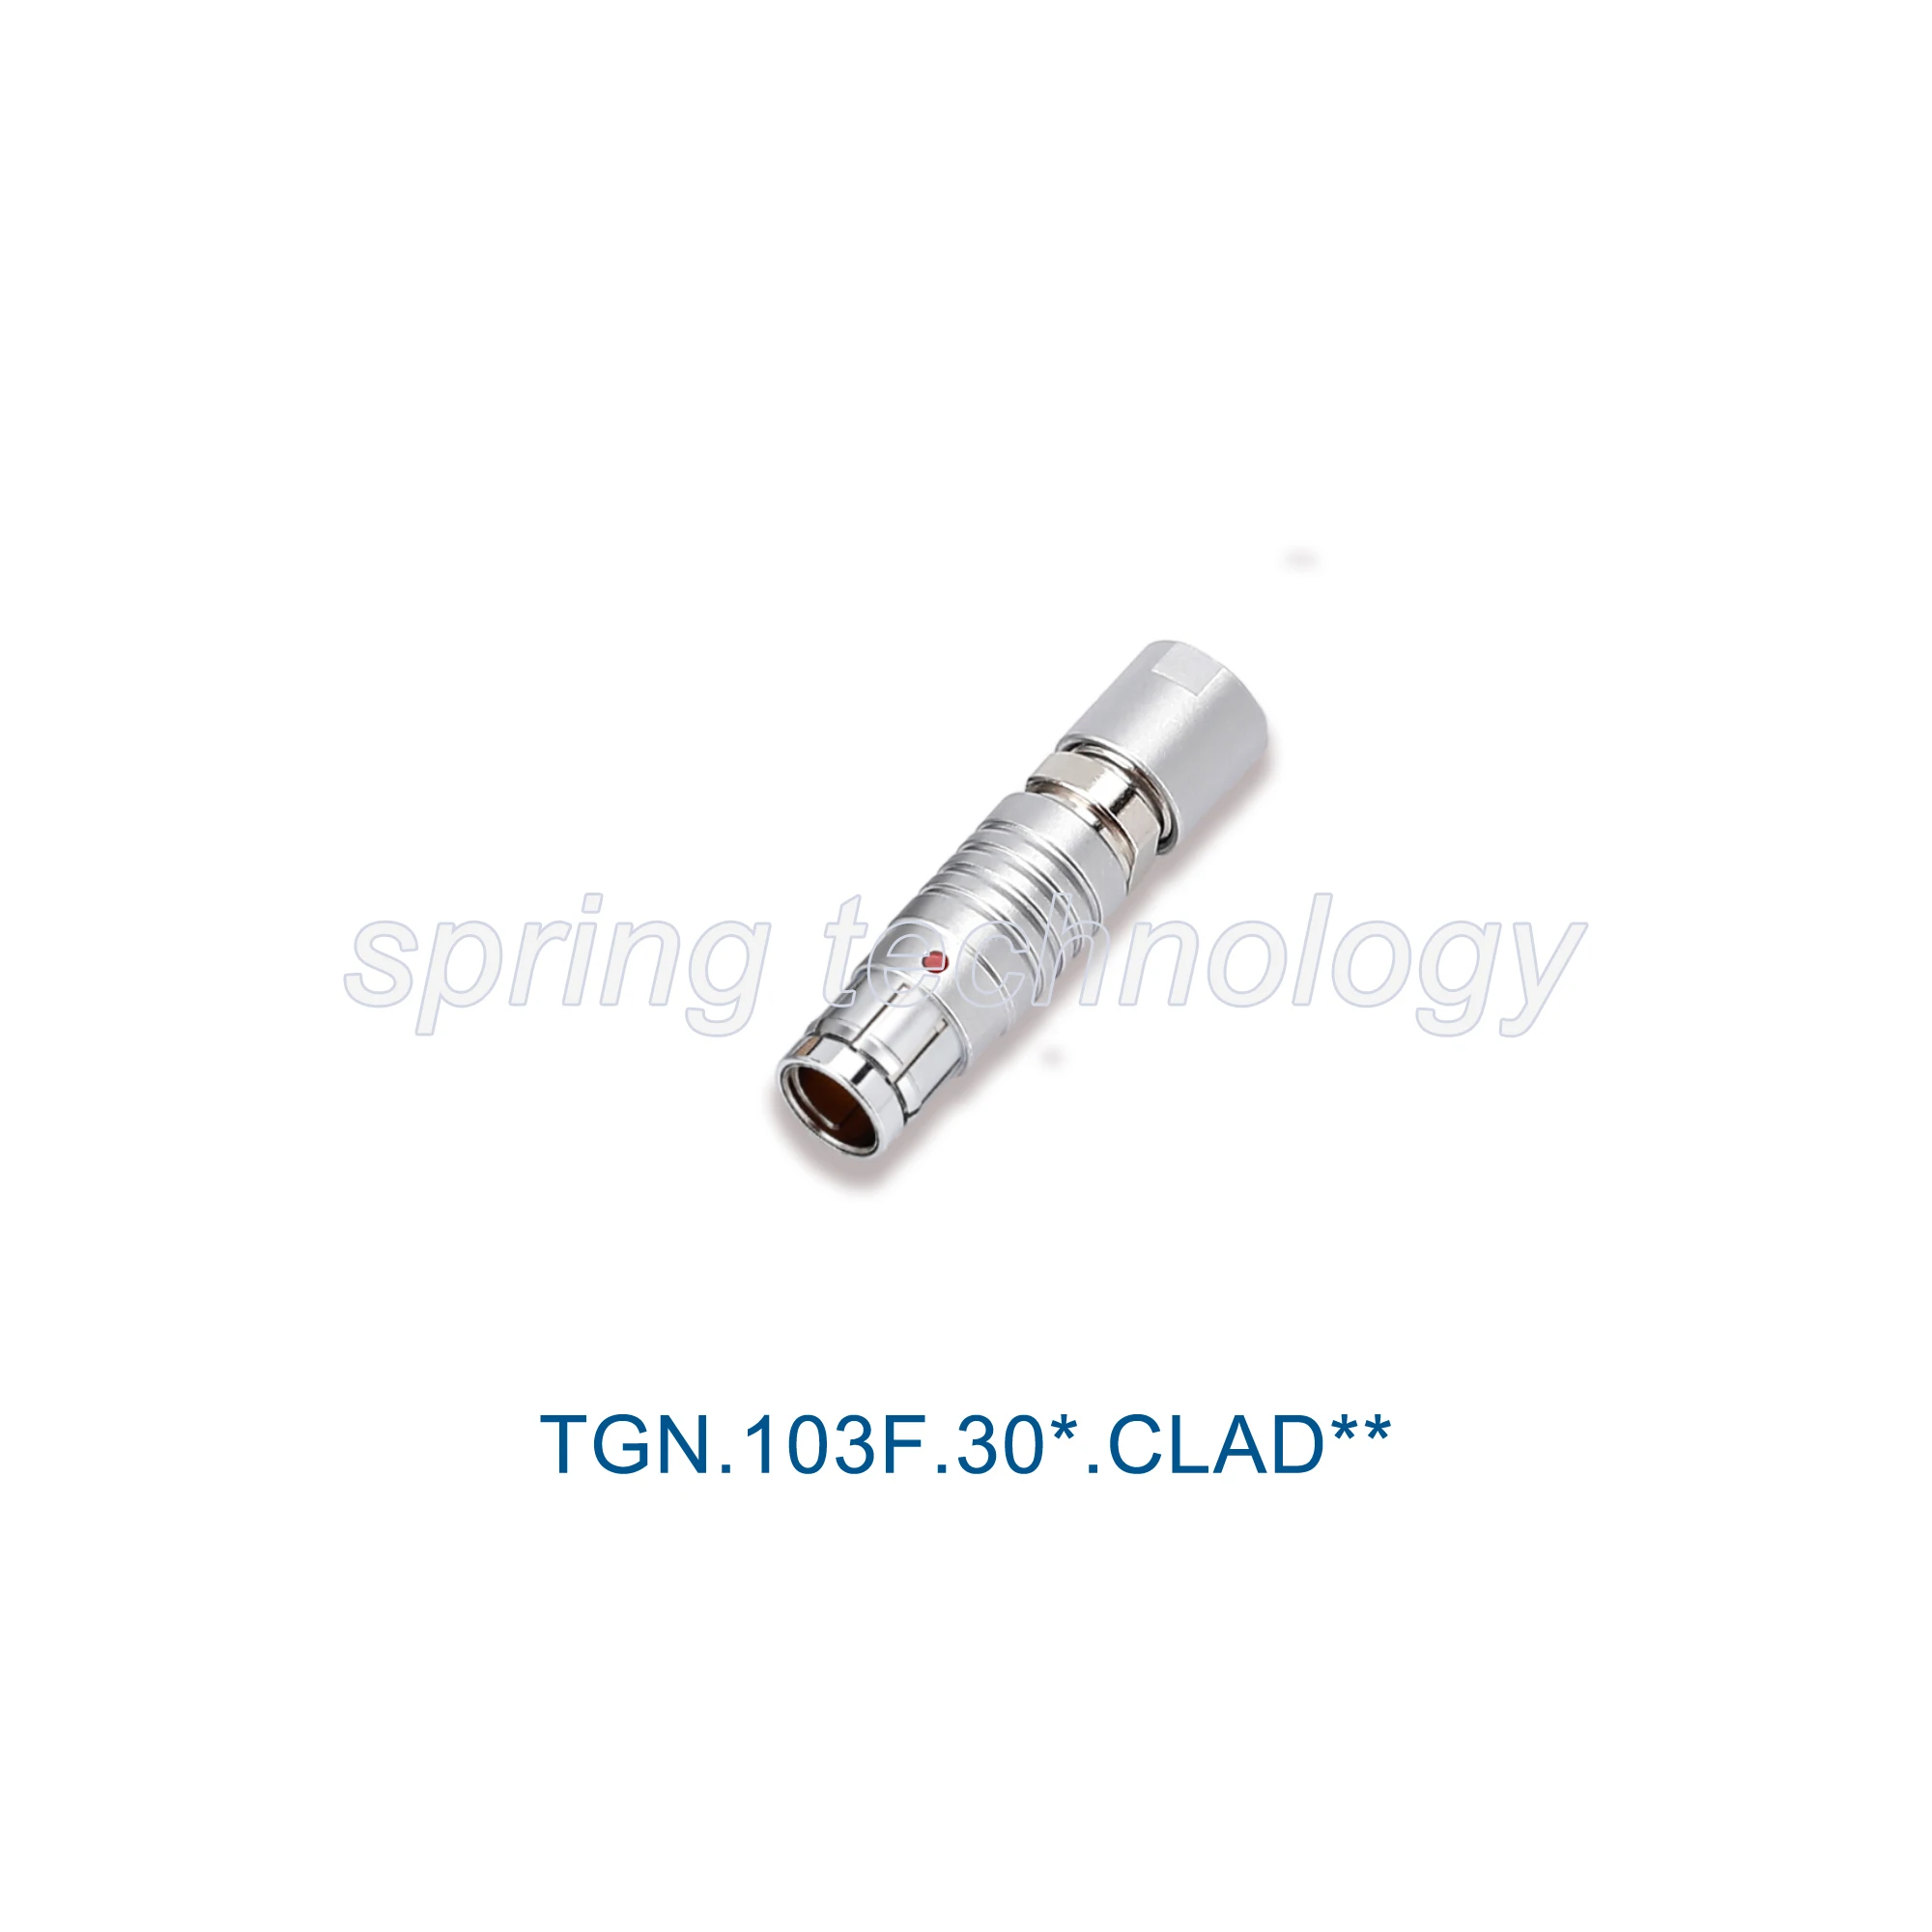 

TGN.103F Push-pull Multi-contact Watertight Cable Connectors, TGN.103F.302/303/304/305/306/307/308/310/312/314/316 Plug